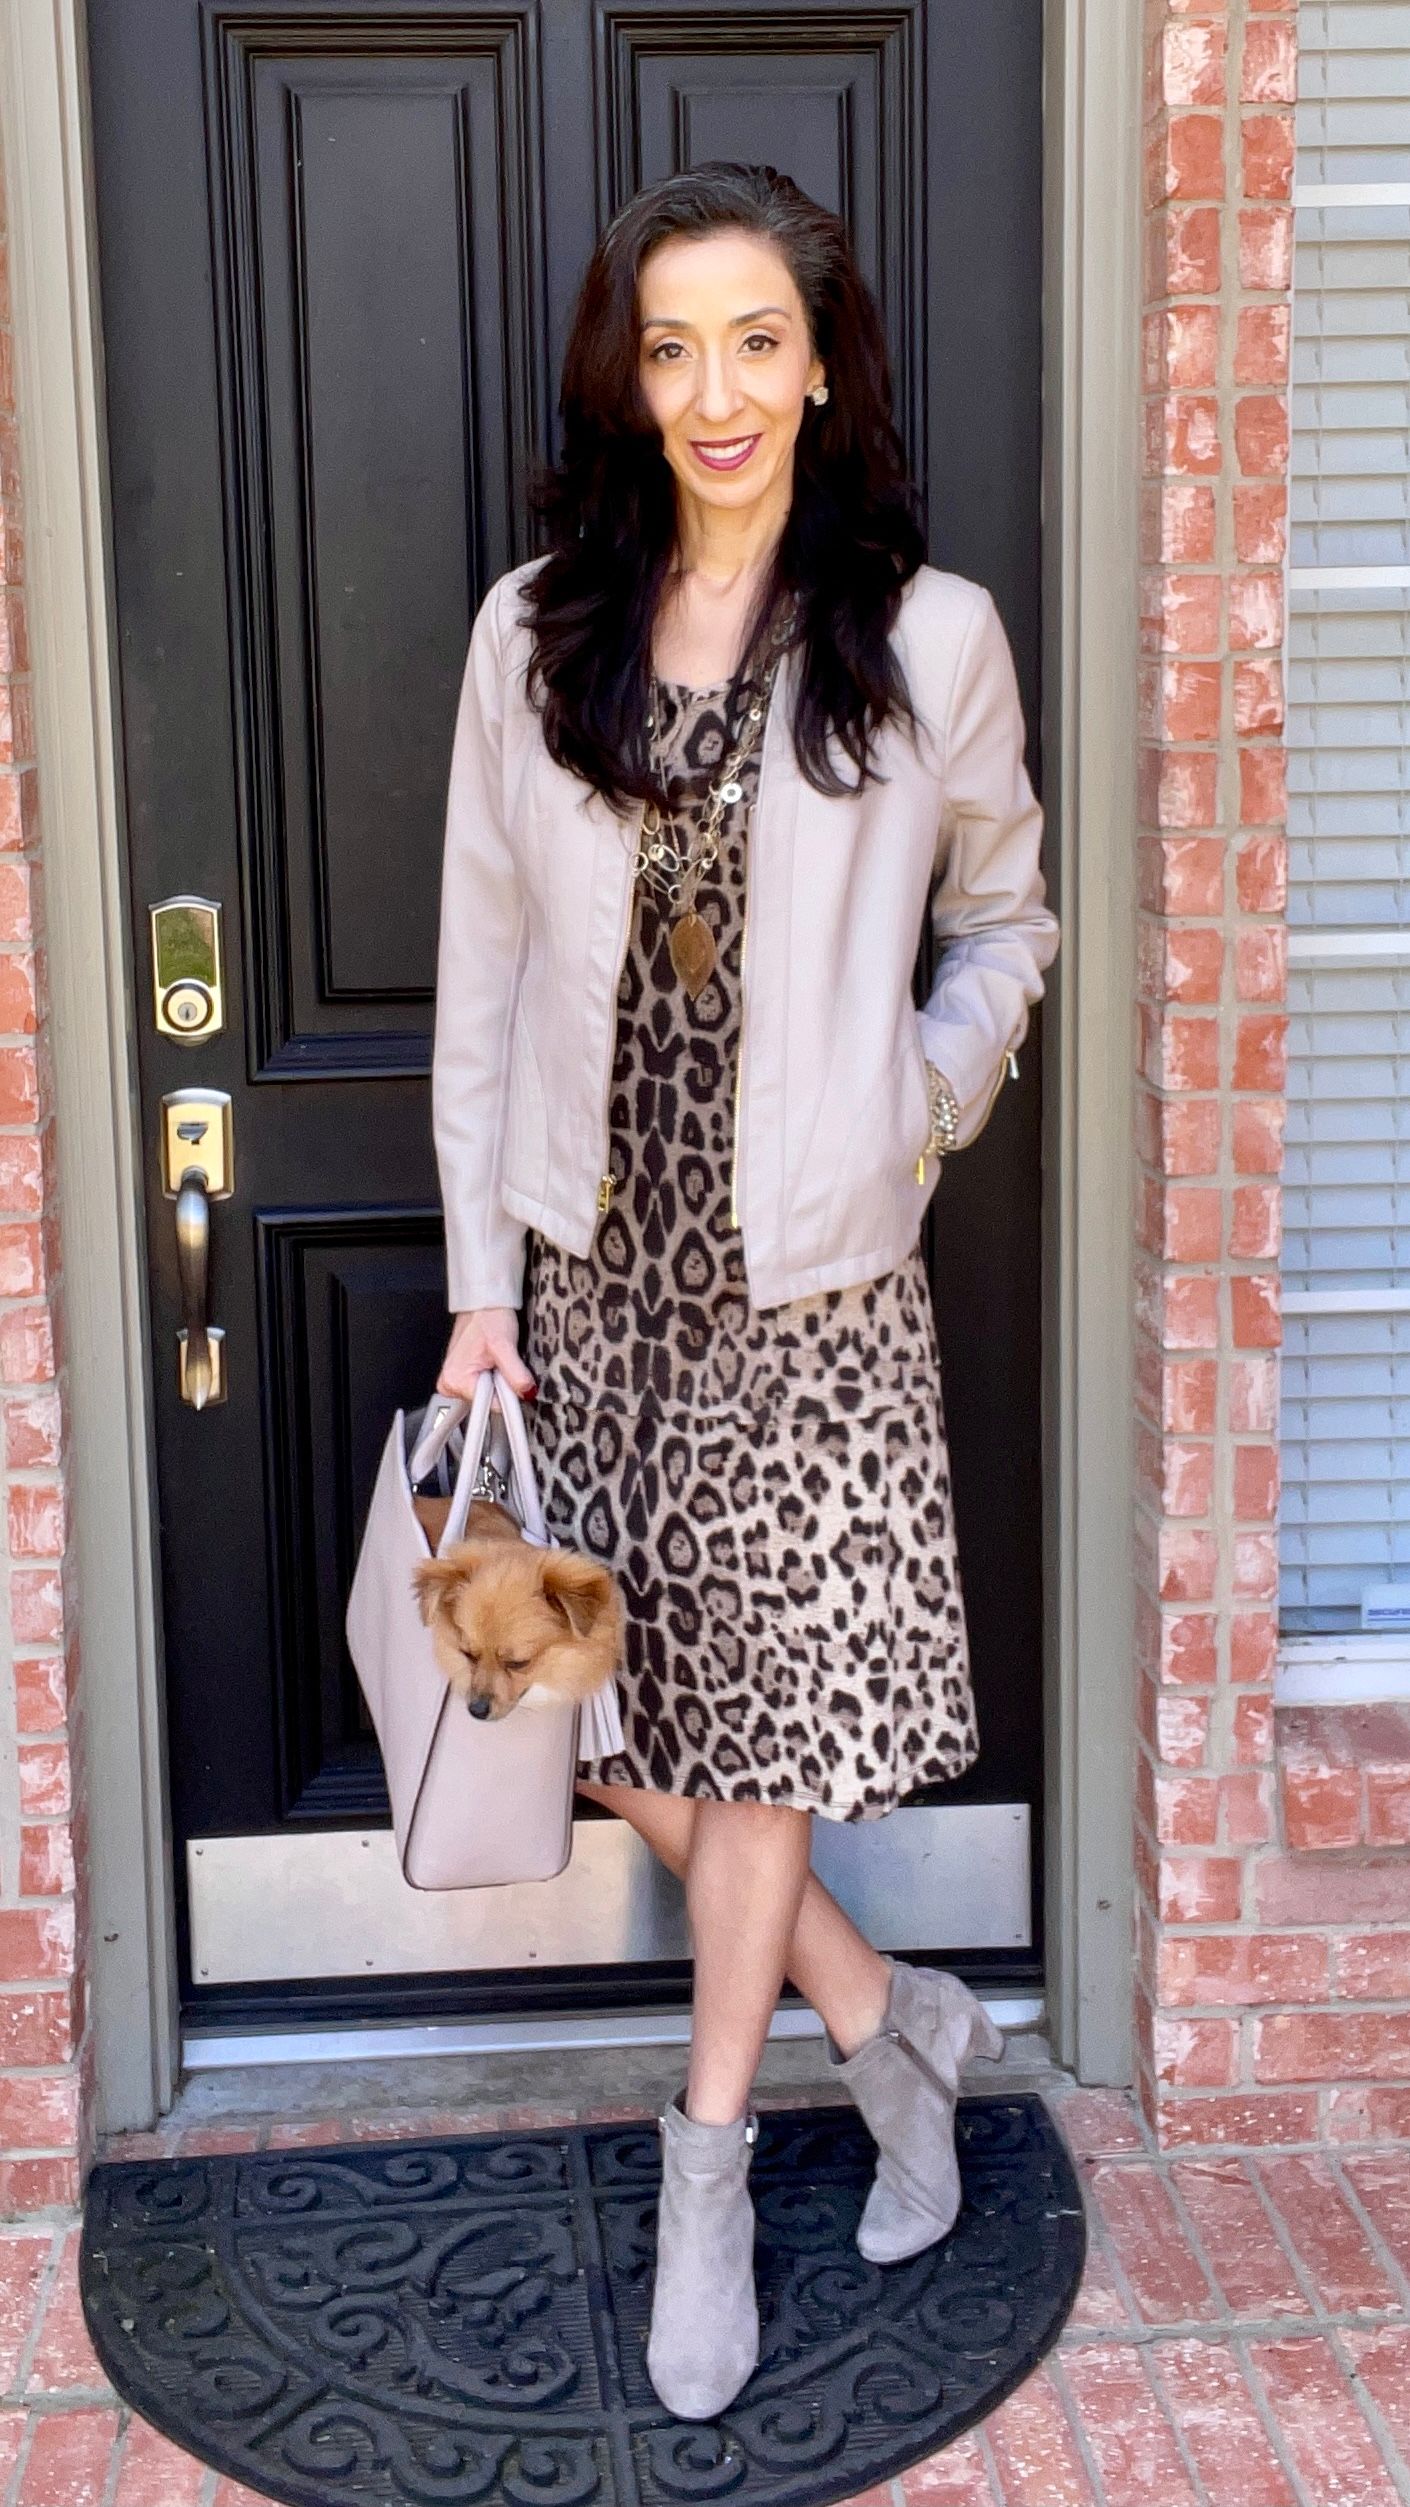 Smiling woman with brunette hair posing in front of her home, holding a bag with a small dog inside, wearing an animal print knee-length dress, taupe leather jacket, and gray booties